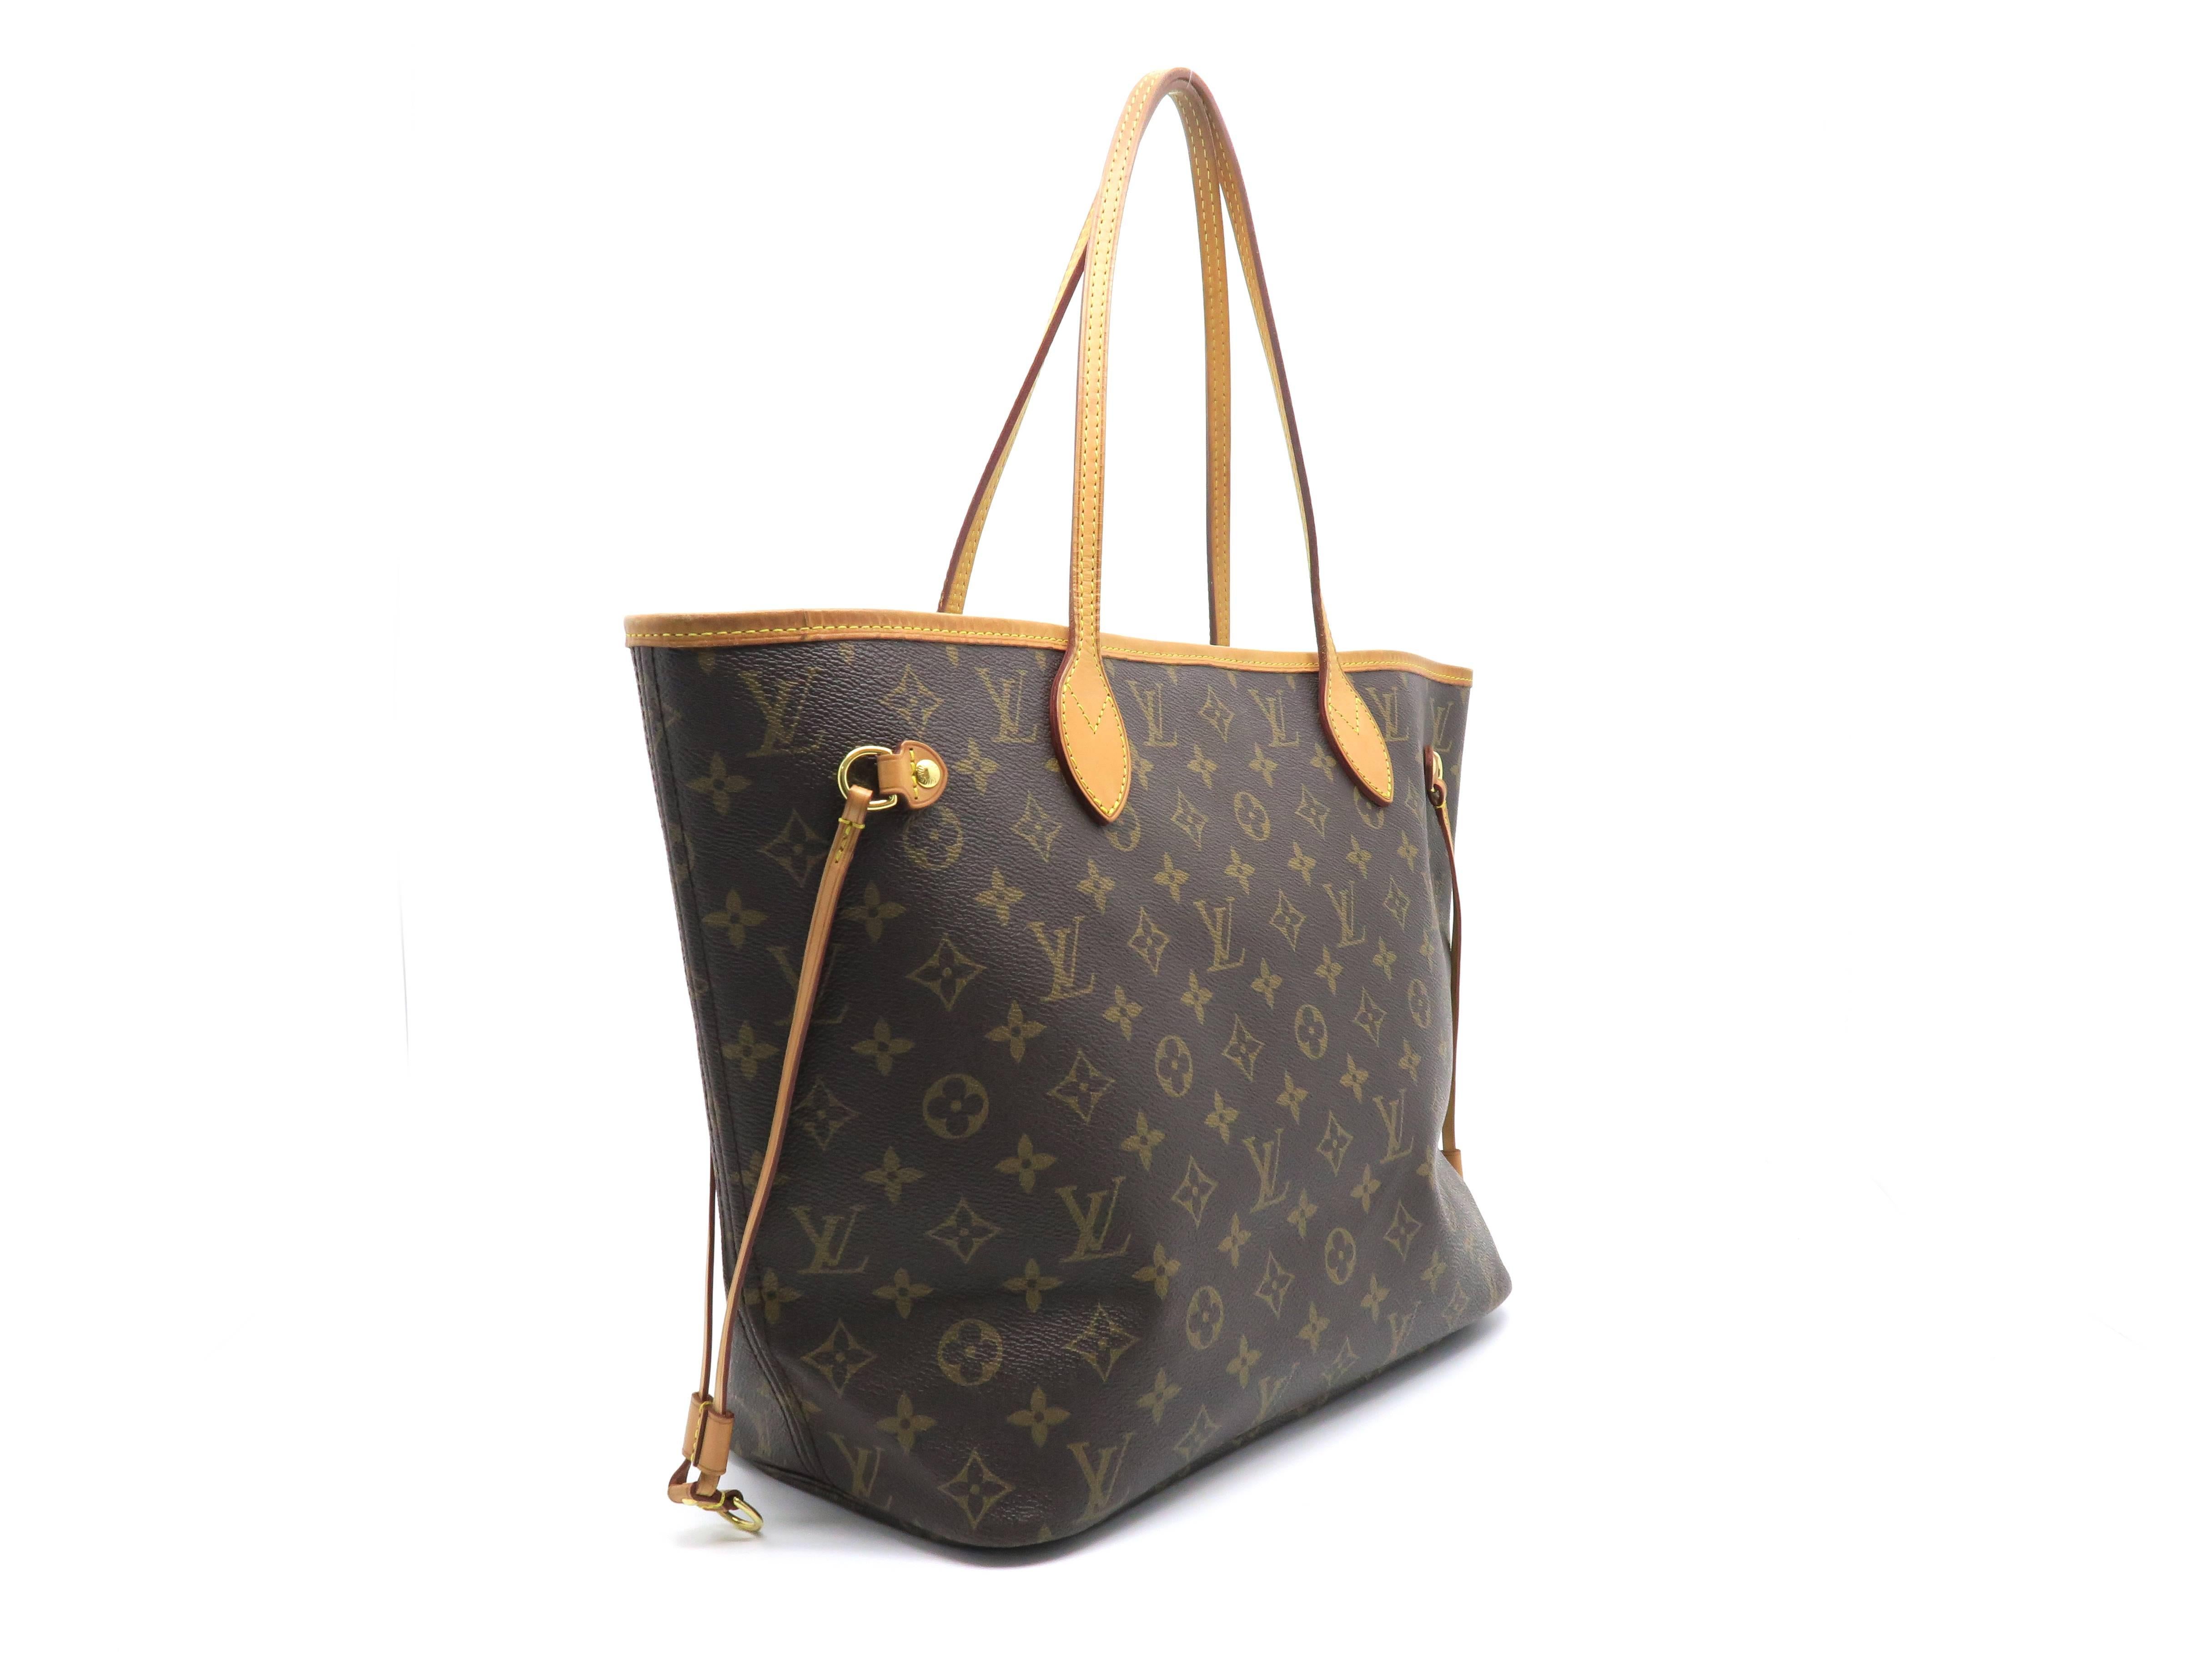 Color: Brown

Material: Monogram Canvas

Condition: Rank A 
Overall: Good, few minor defects
Surface: Minor Scratches
Corners: Minor Scratches
Edges: Minor Scratches
Handles/Straps: Minor Stains
Hardware: Minor Scratches

Dimension: W32 × H28 ×